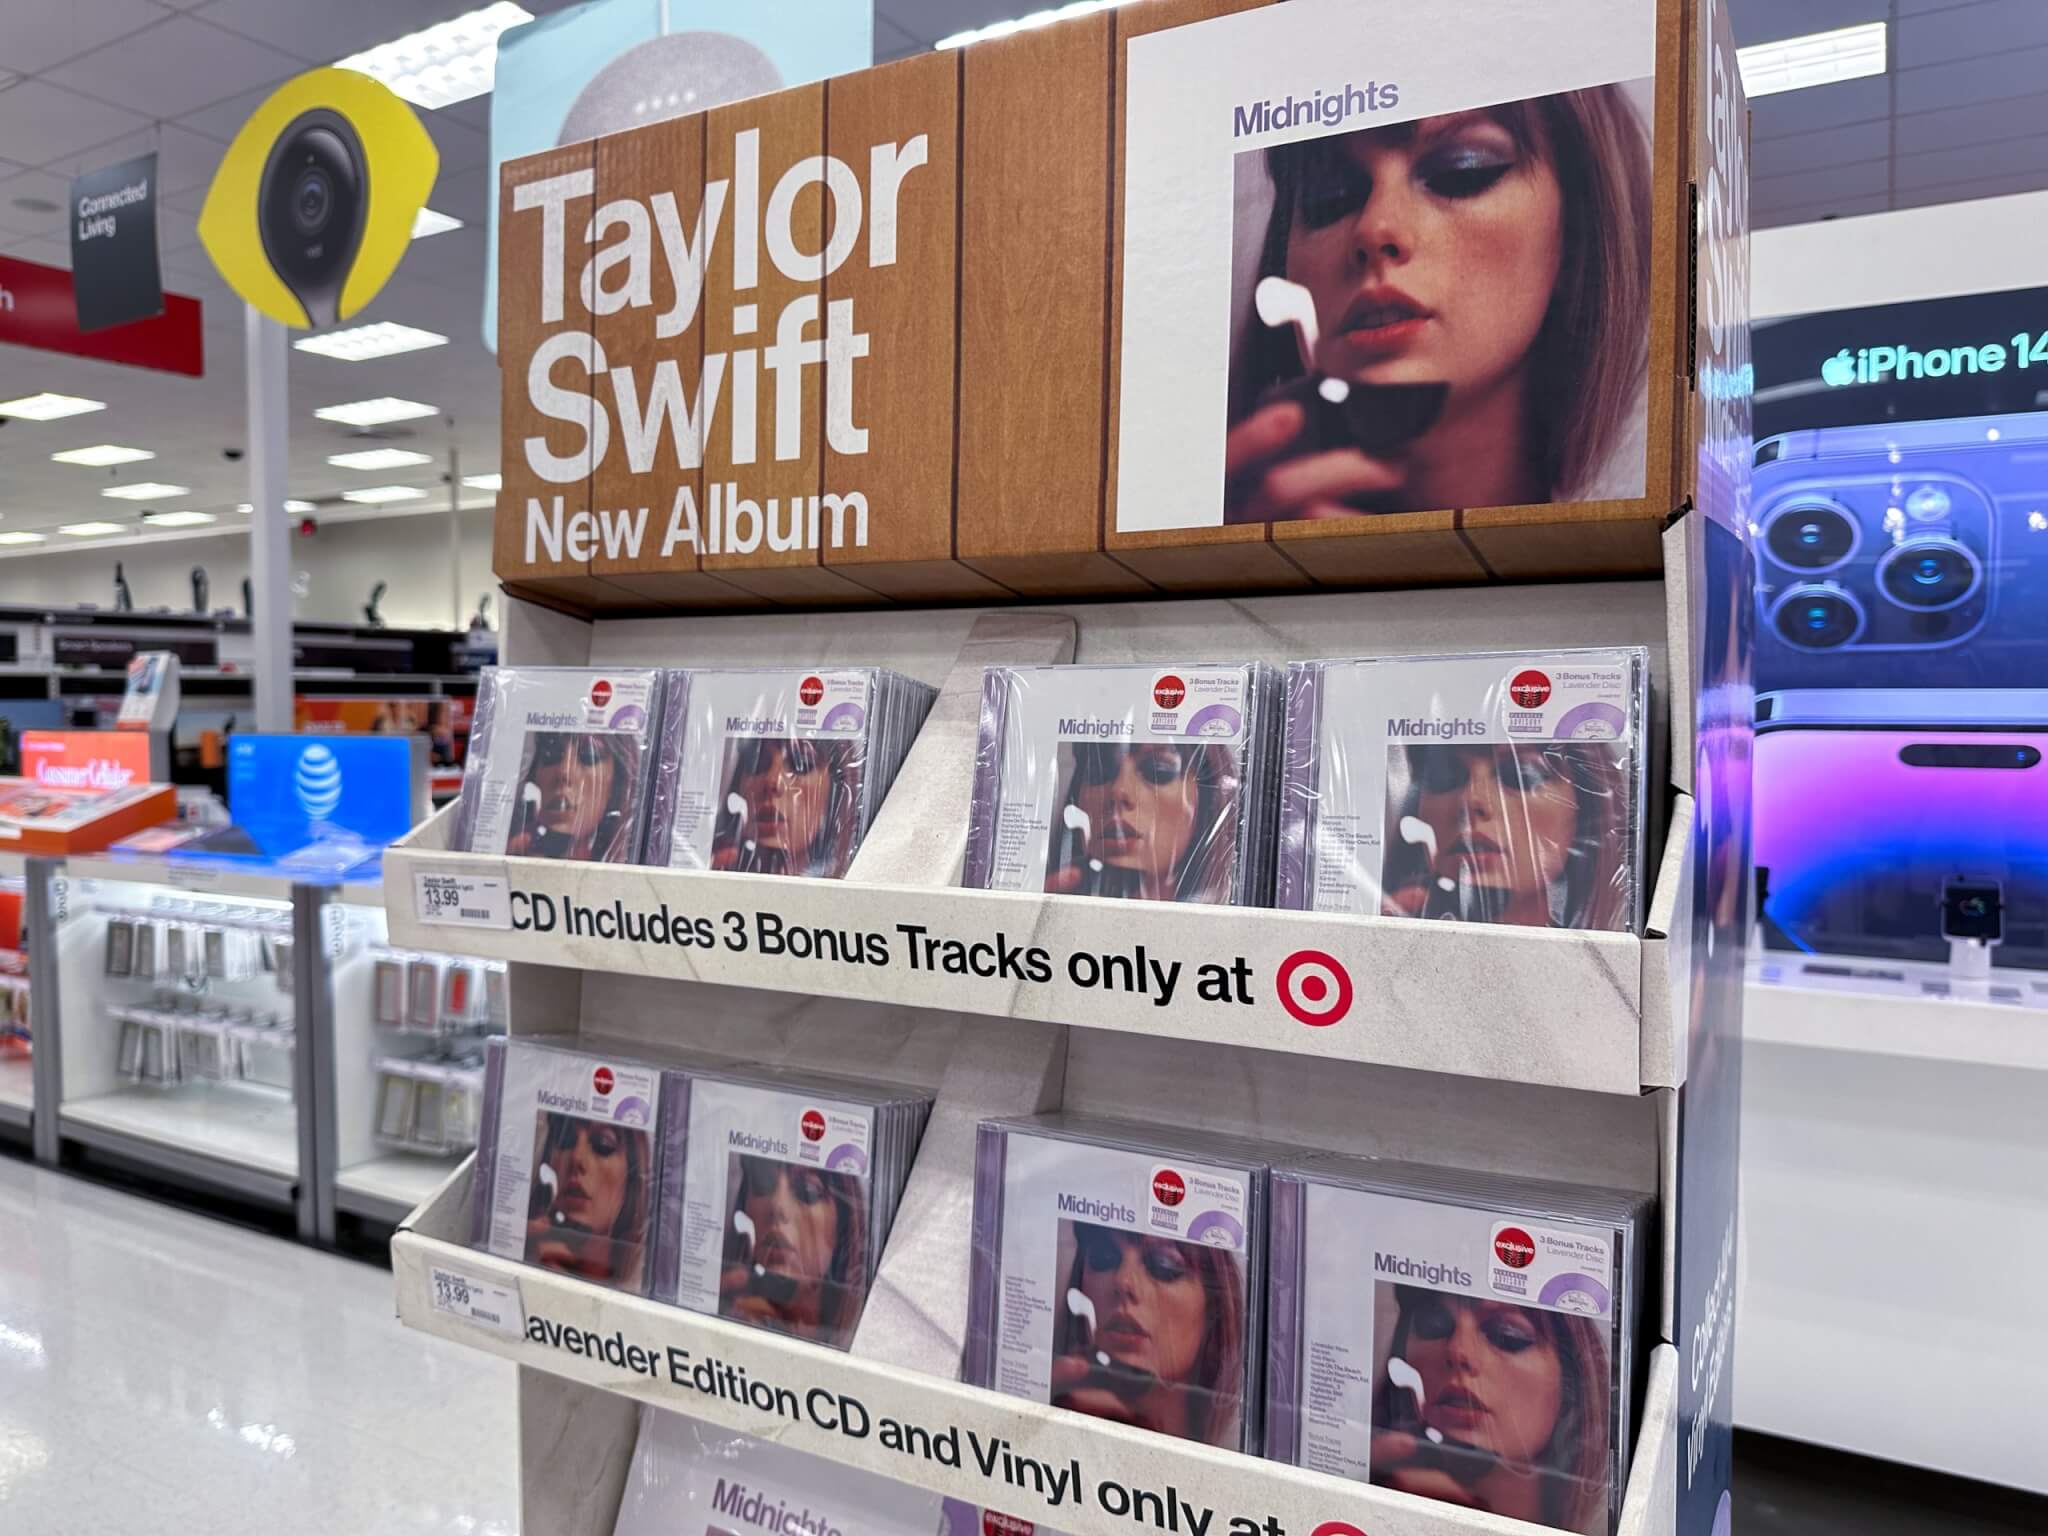 Taylor Swift's album "Midnights" for sale at Target.